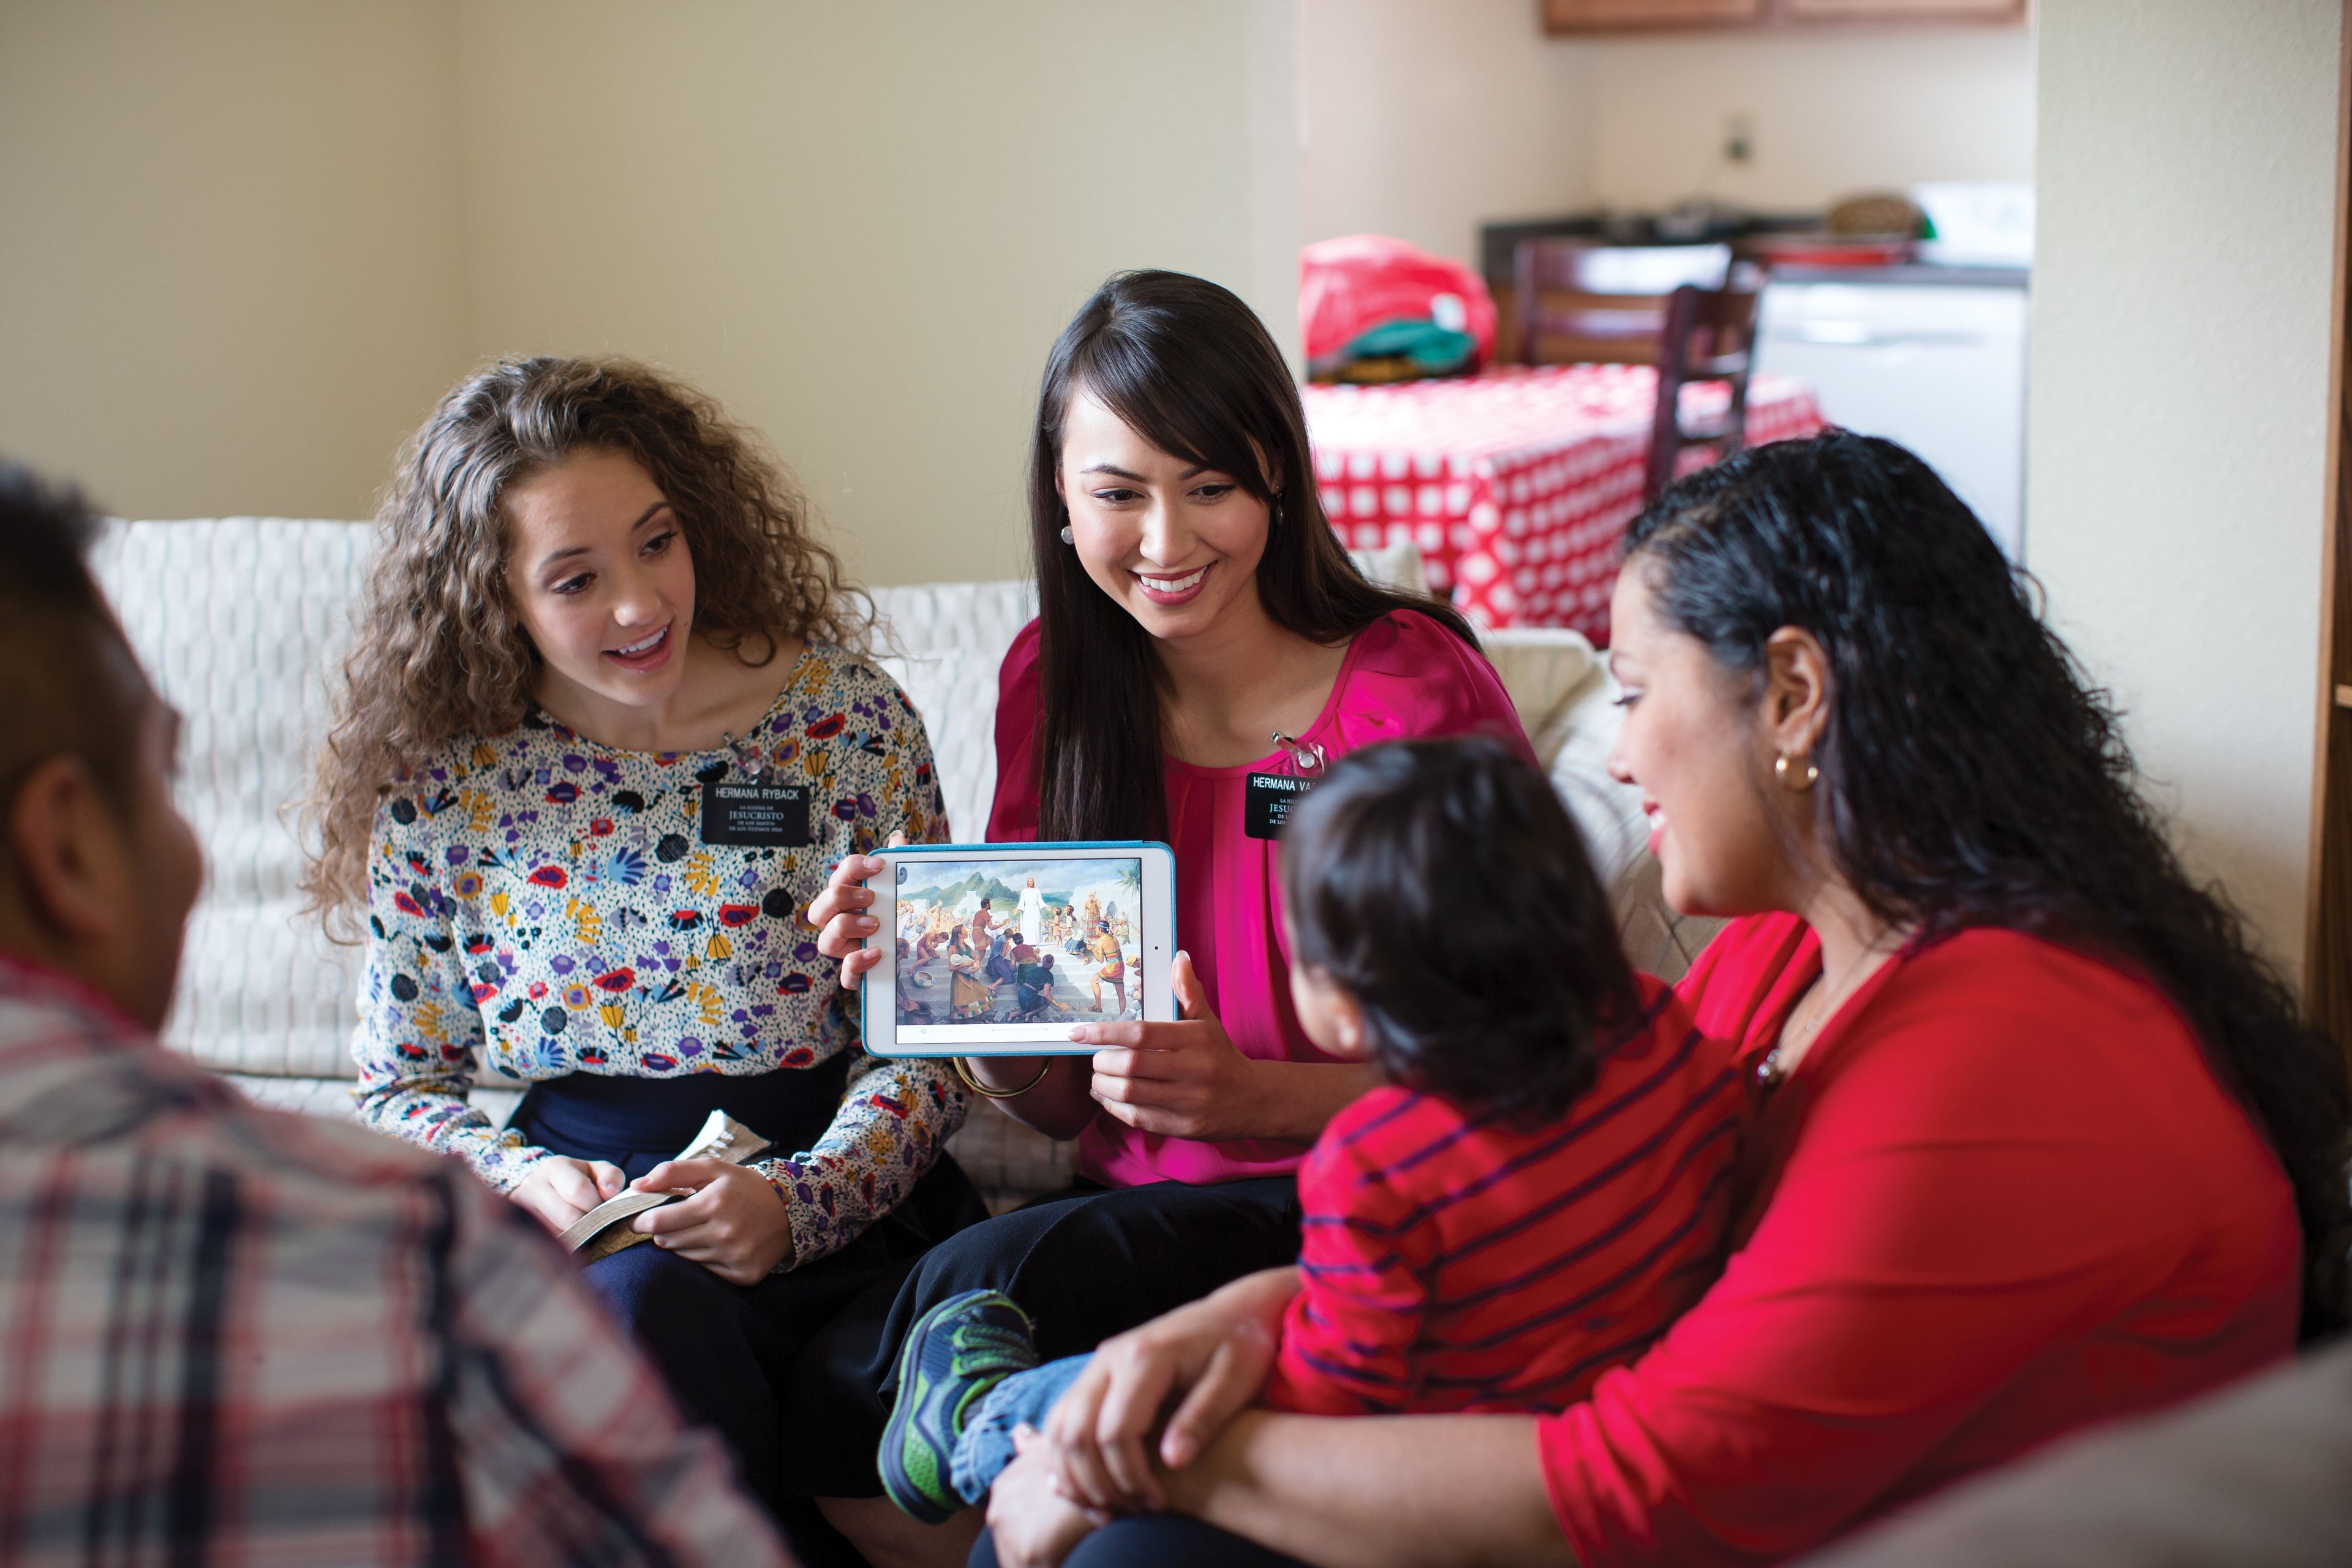 Two sister missionaries teach a family and show them gospel art on a tablet.